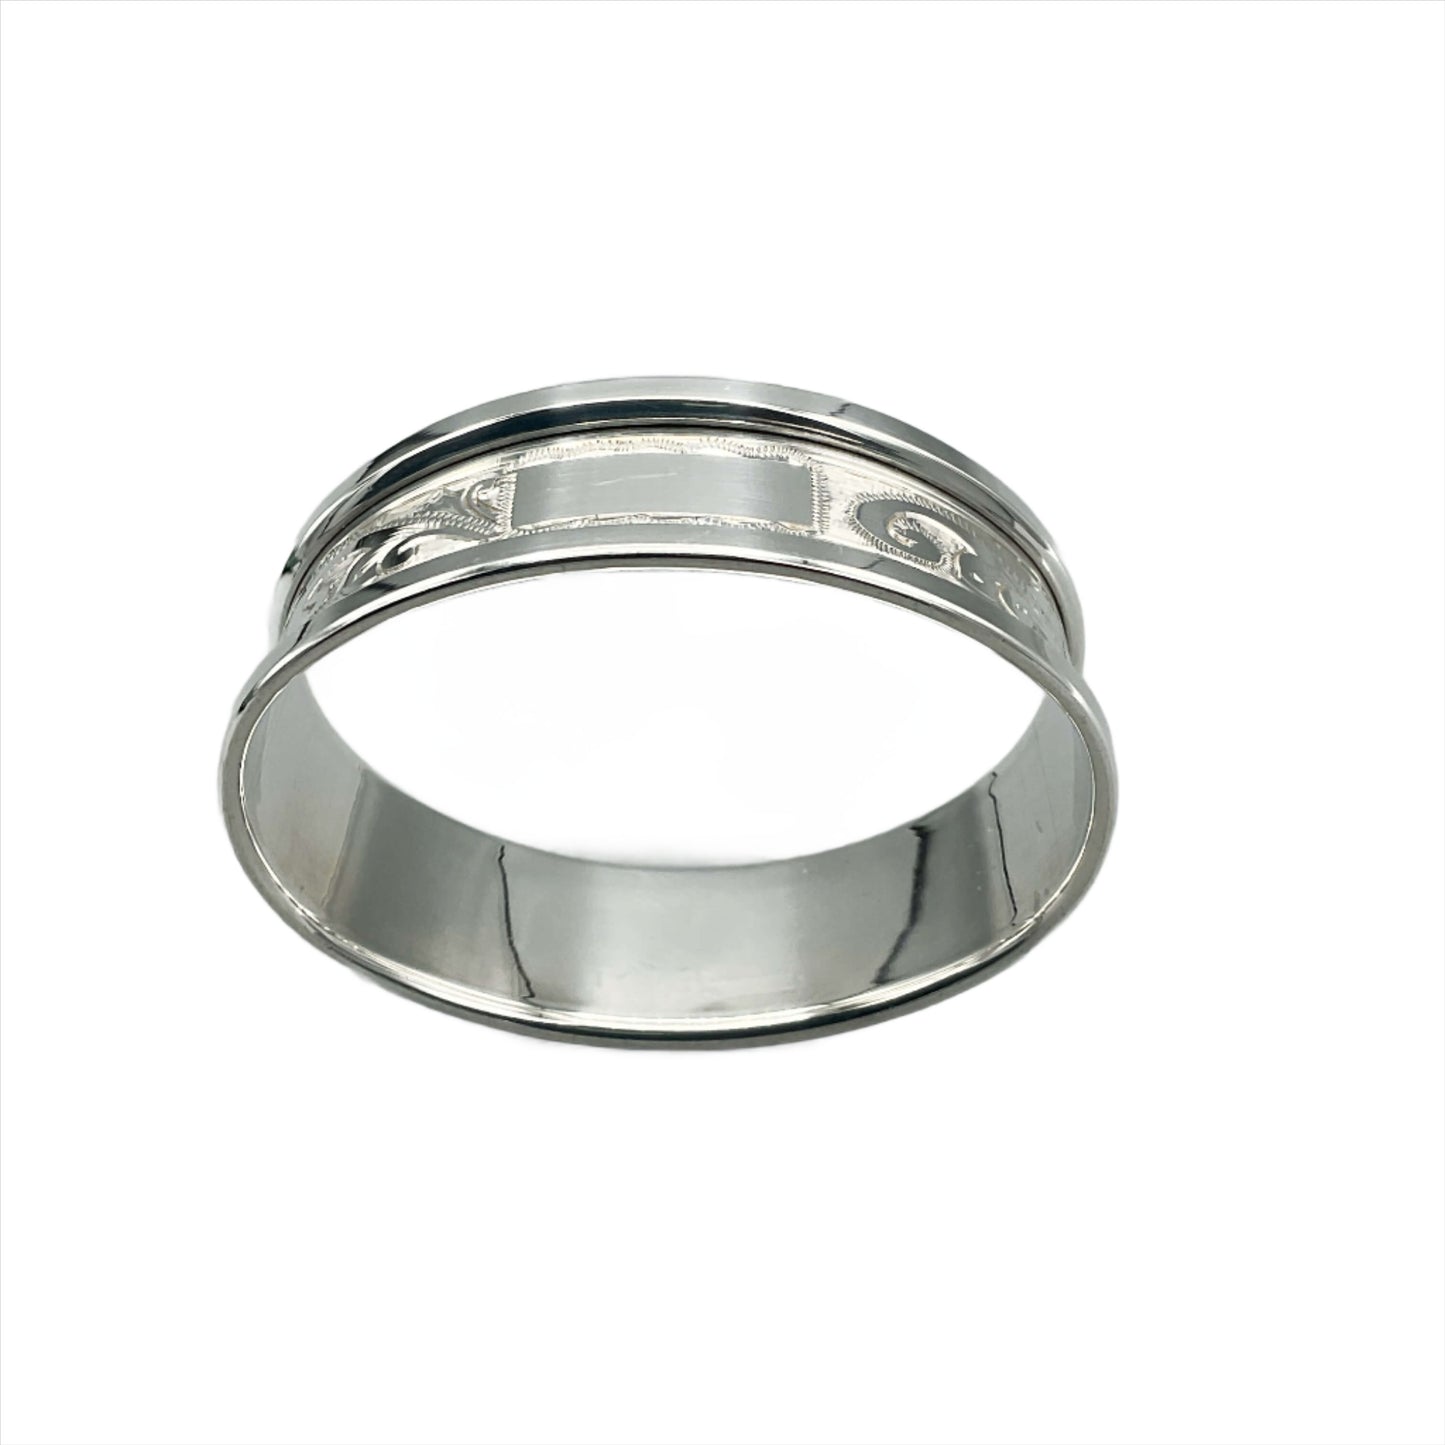 Silver napkin ring with blank rectangular cartouche and etched flower pattern on a plain background